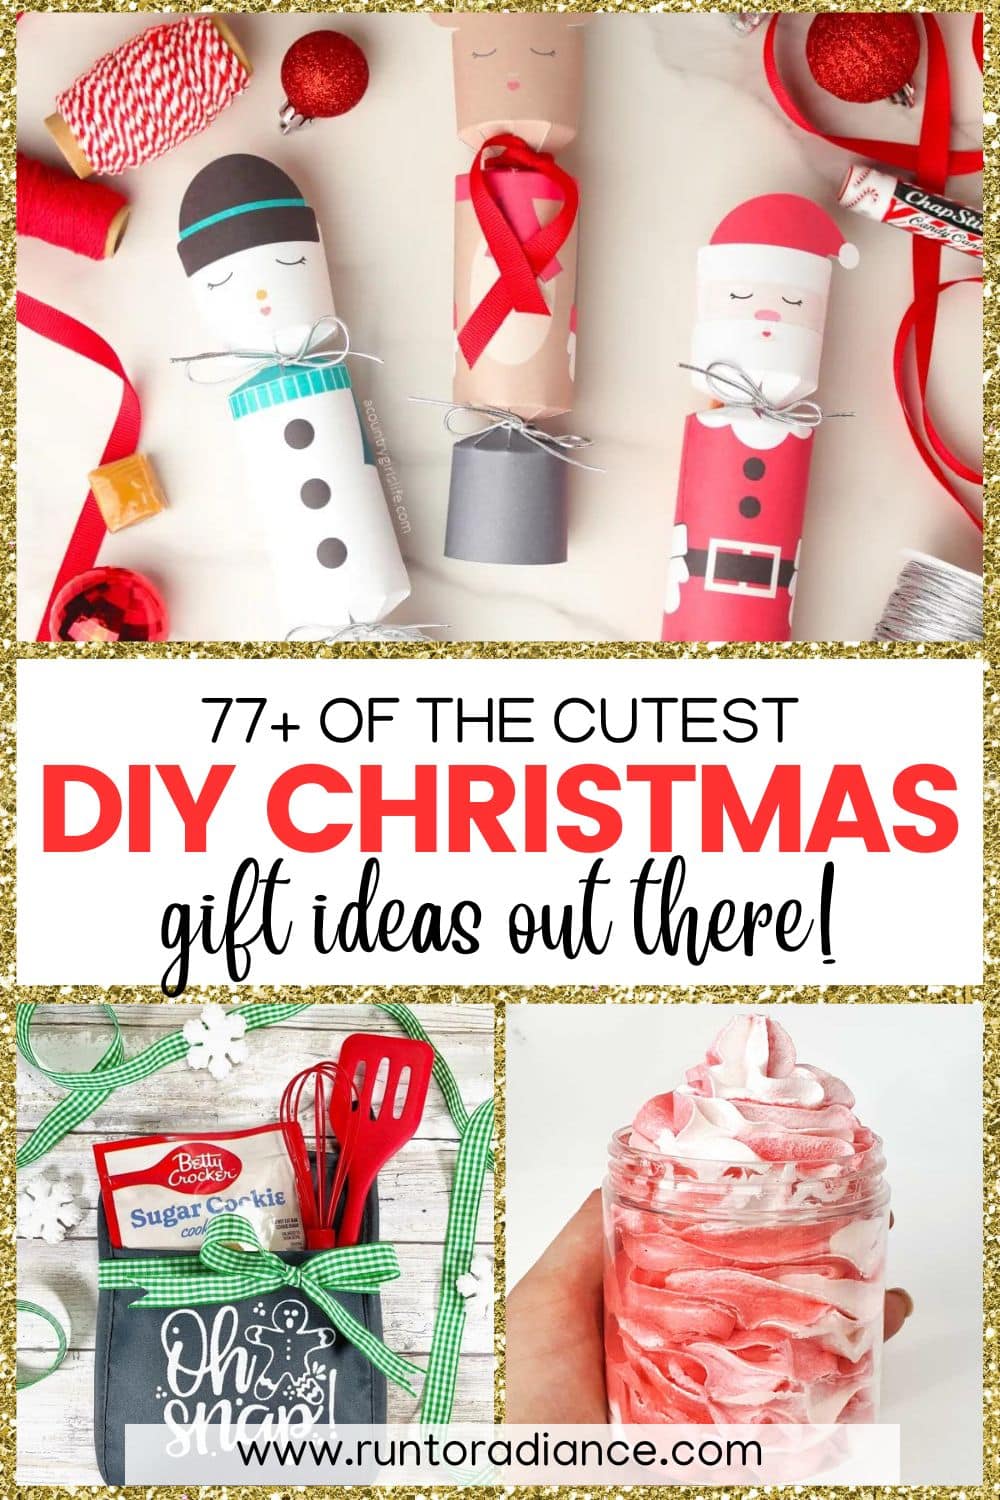 Collage of diy christmas gift ideas